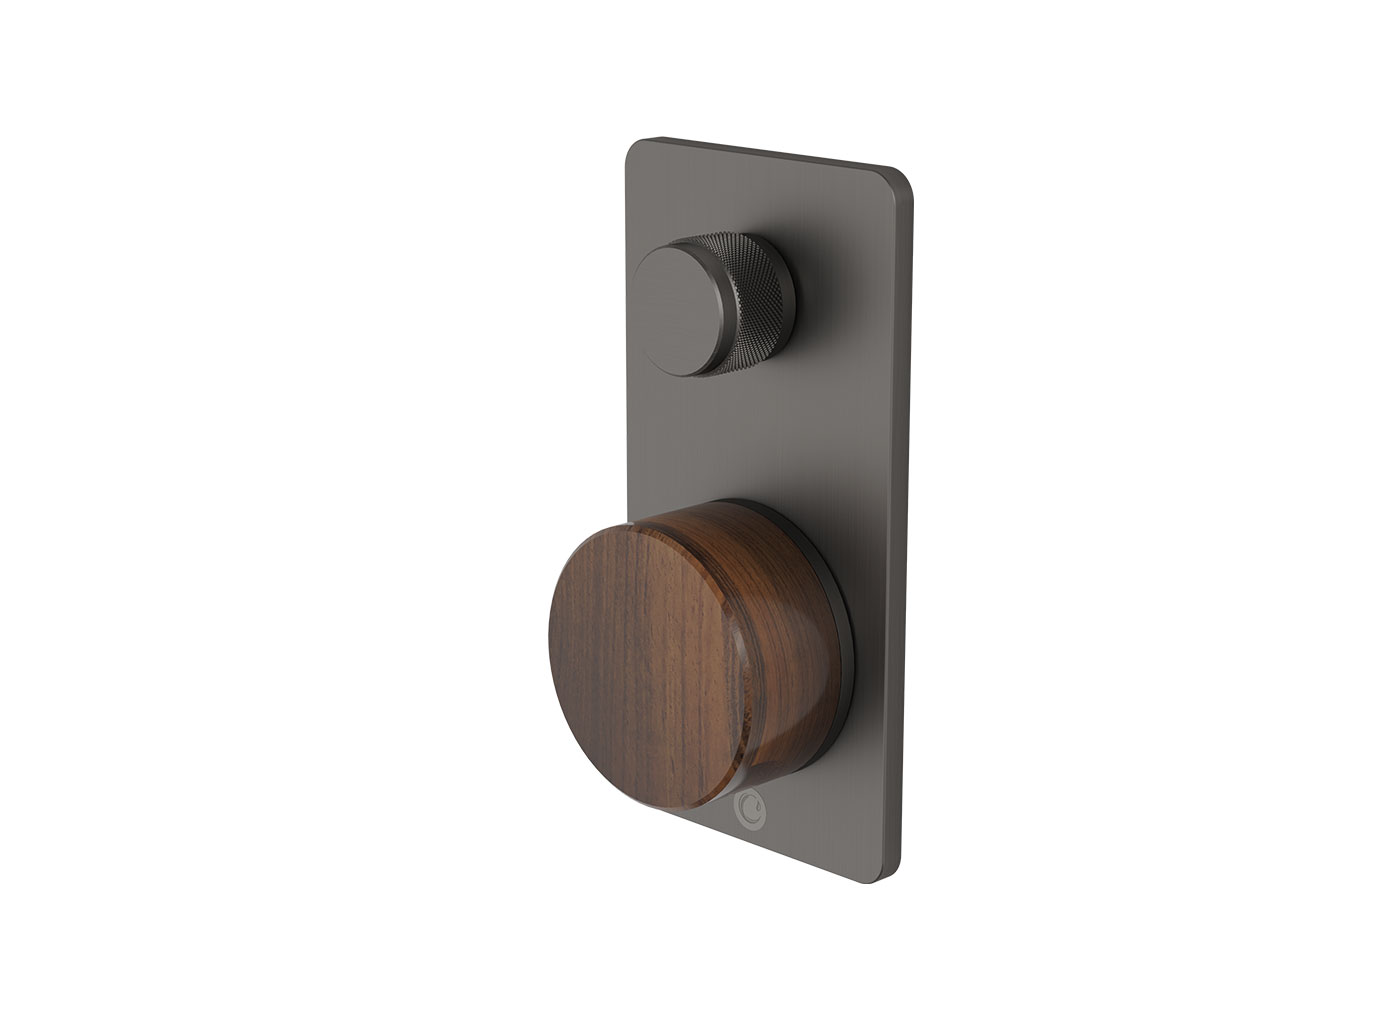 Striking gunmetal tapware featuring a metal knurled detailed handle and your choice of signature Tasmanian timber handle to create a luxury tapware range like none you've seen before.